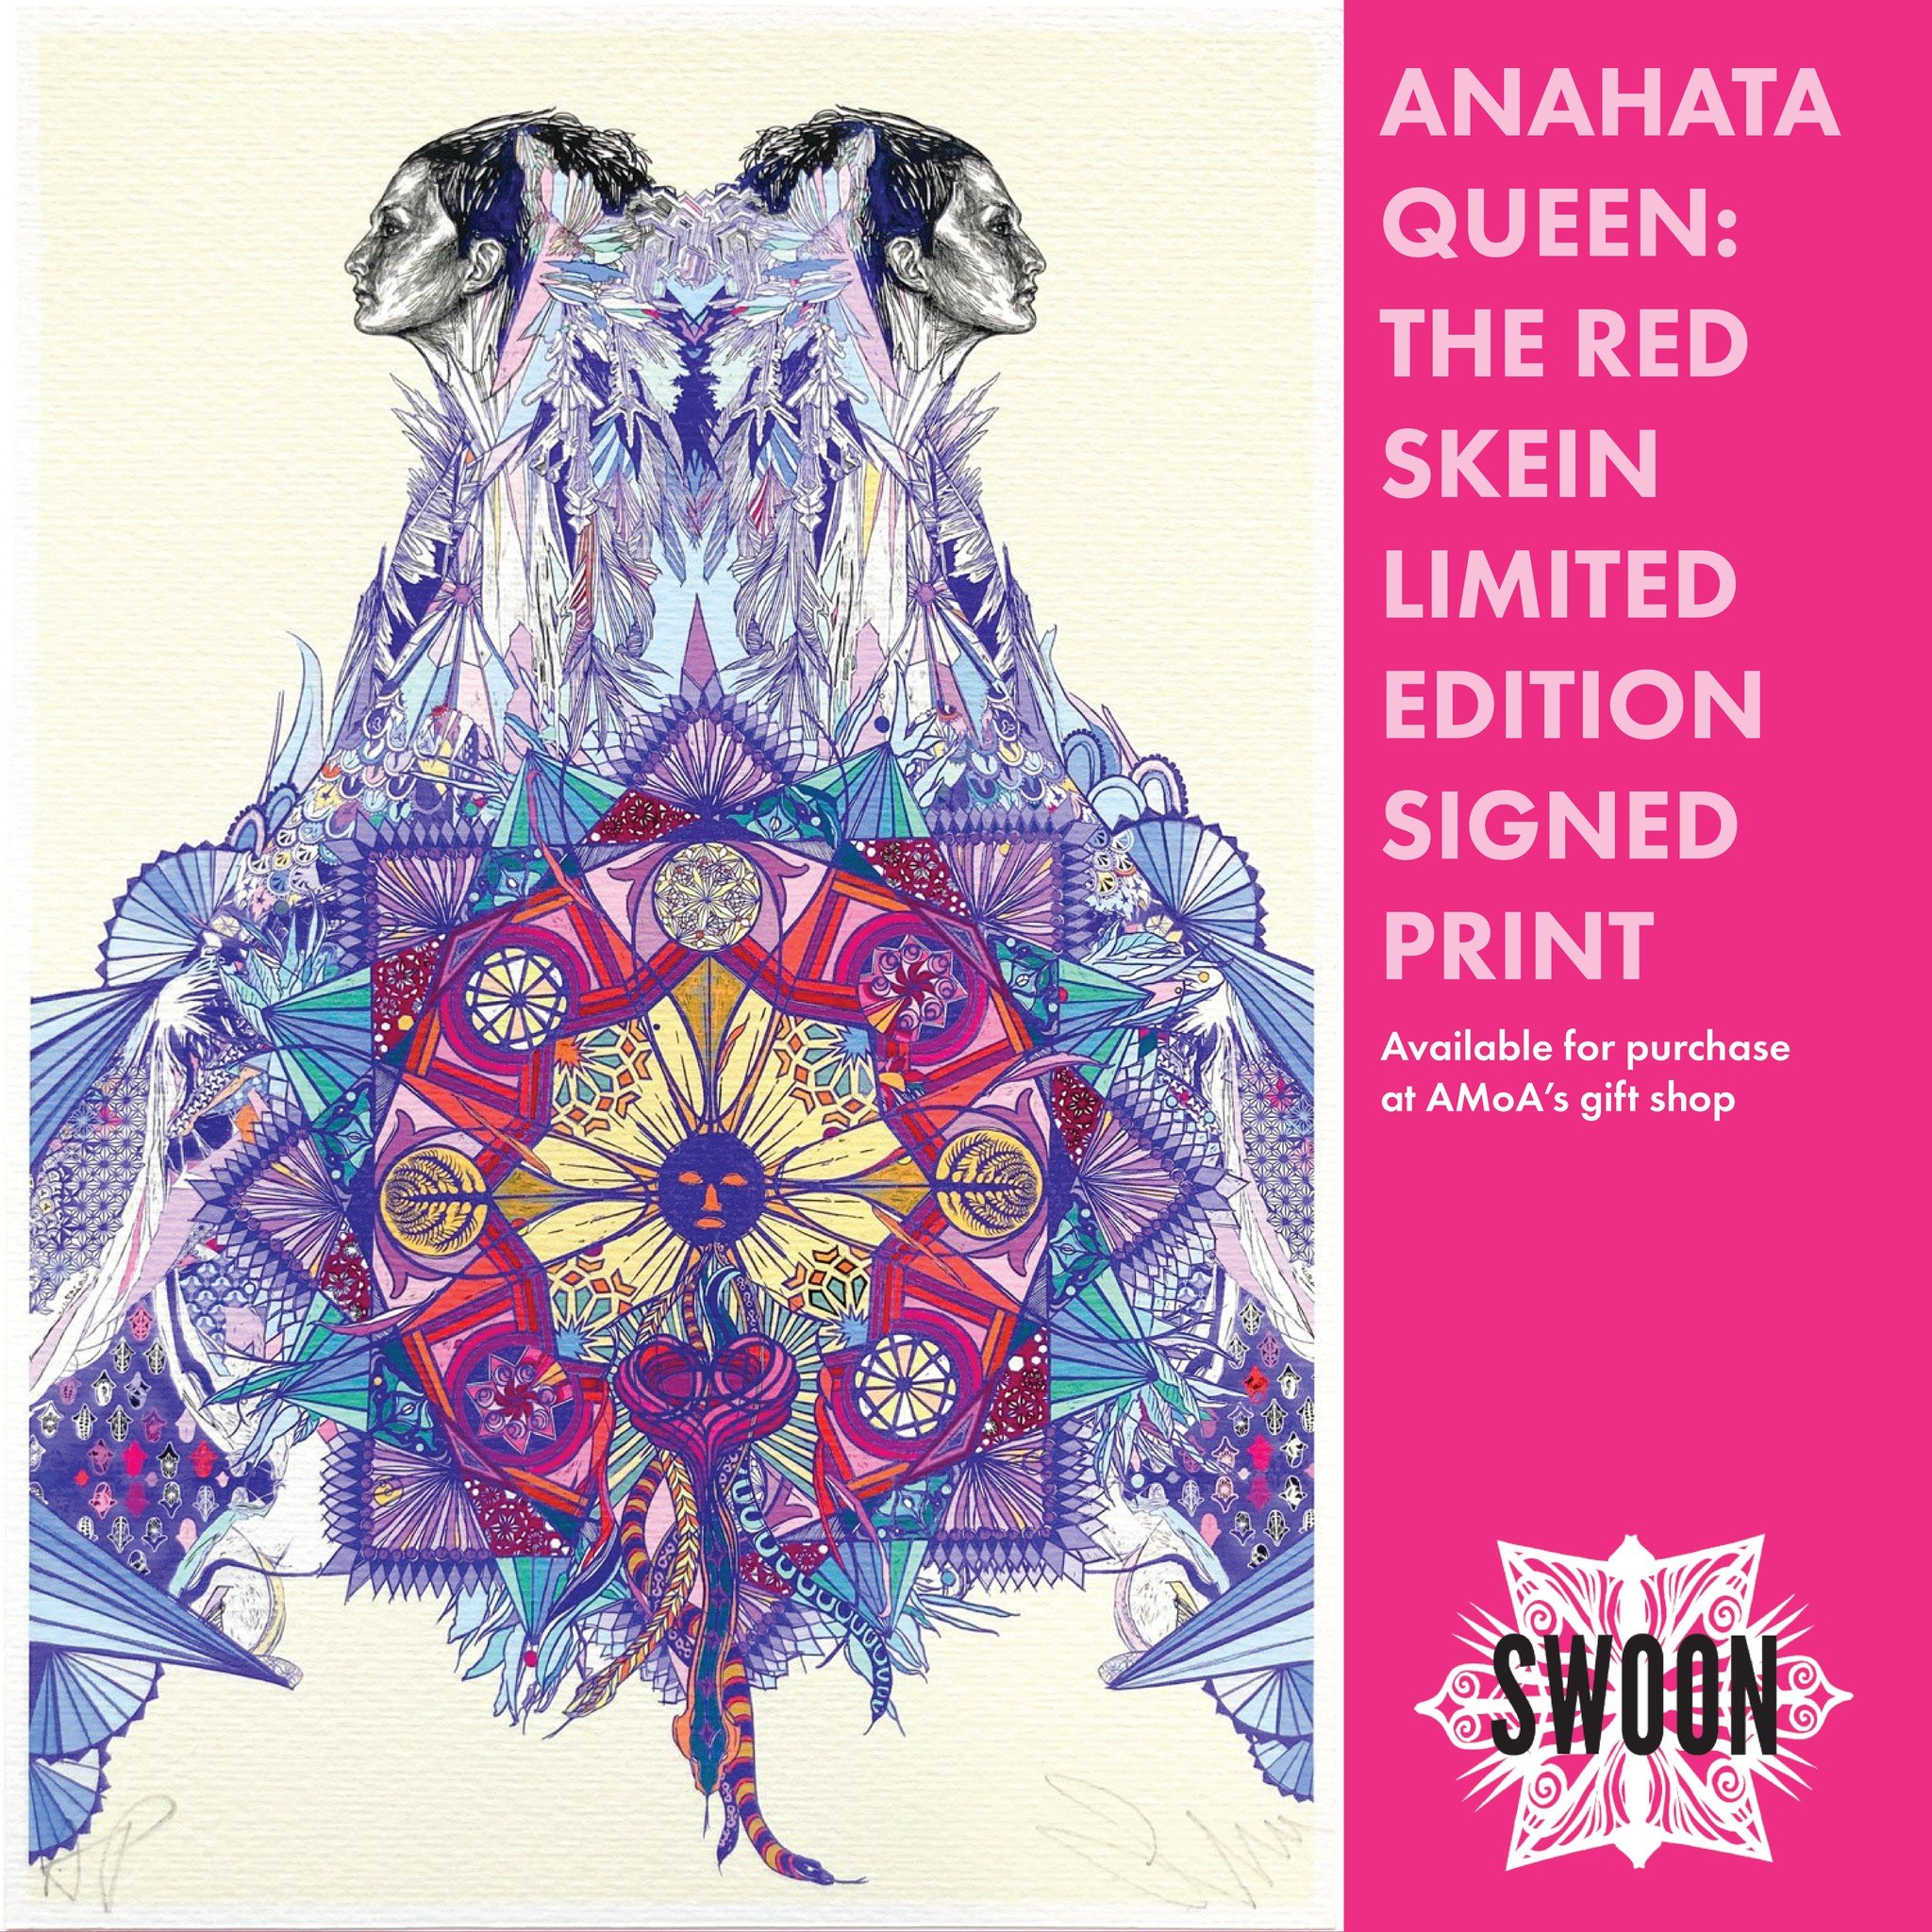 Anahata Queen: The Red Skein LIMITED EDITION SIGNED PRINT is now available for purchase at AMoA's gift shop!